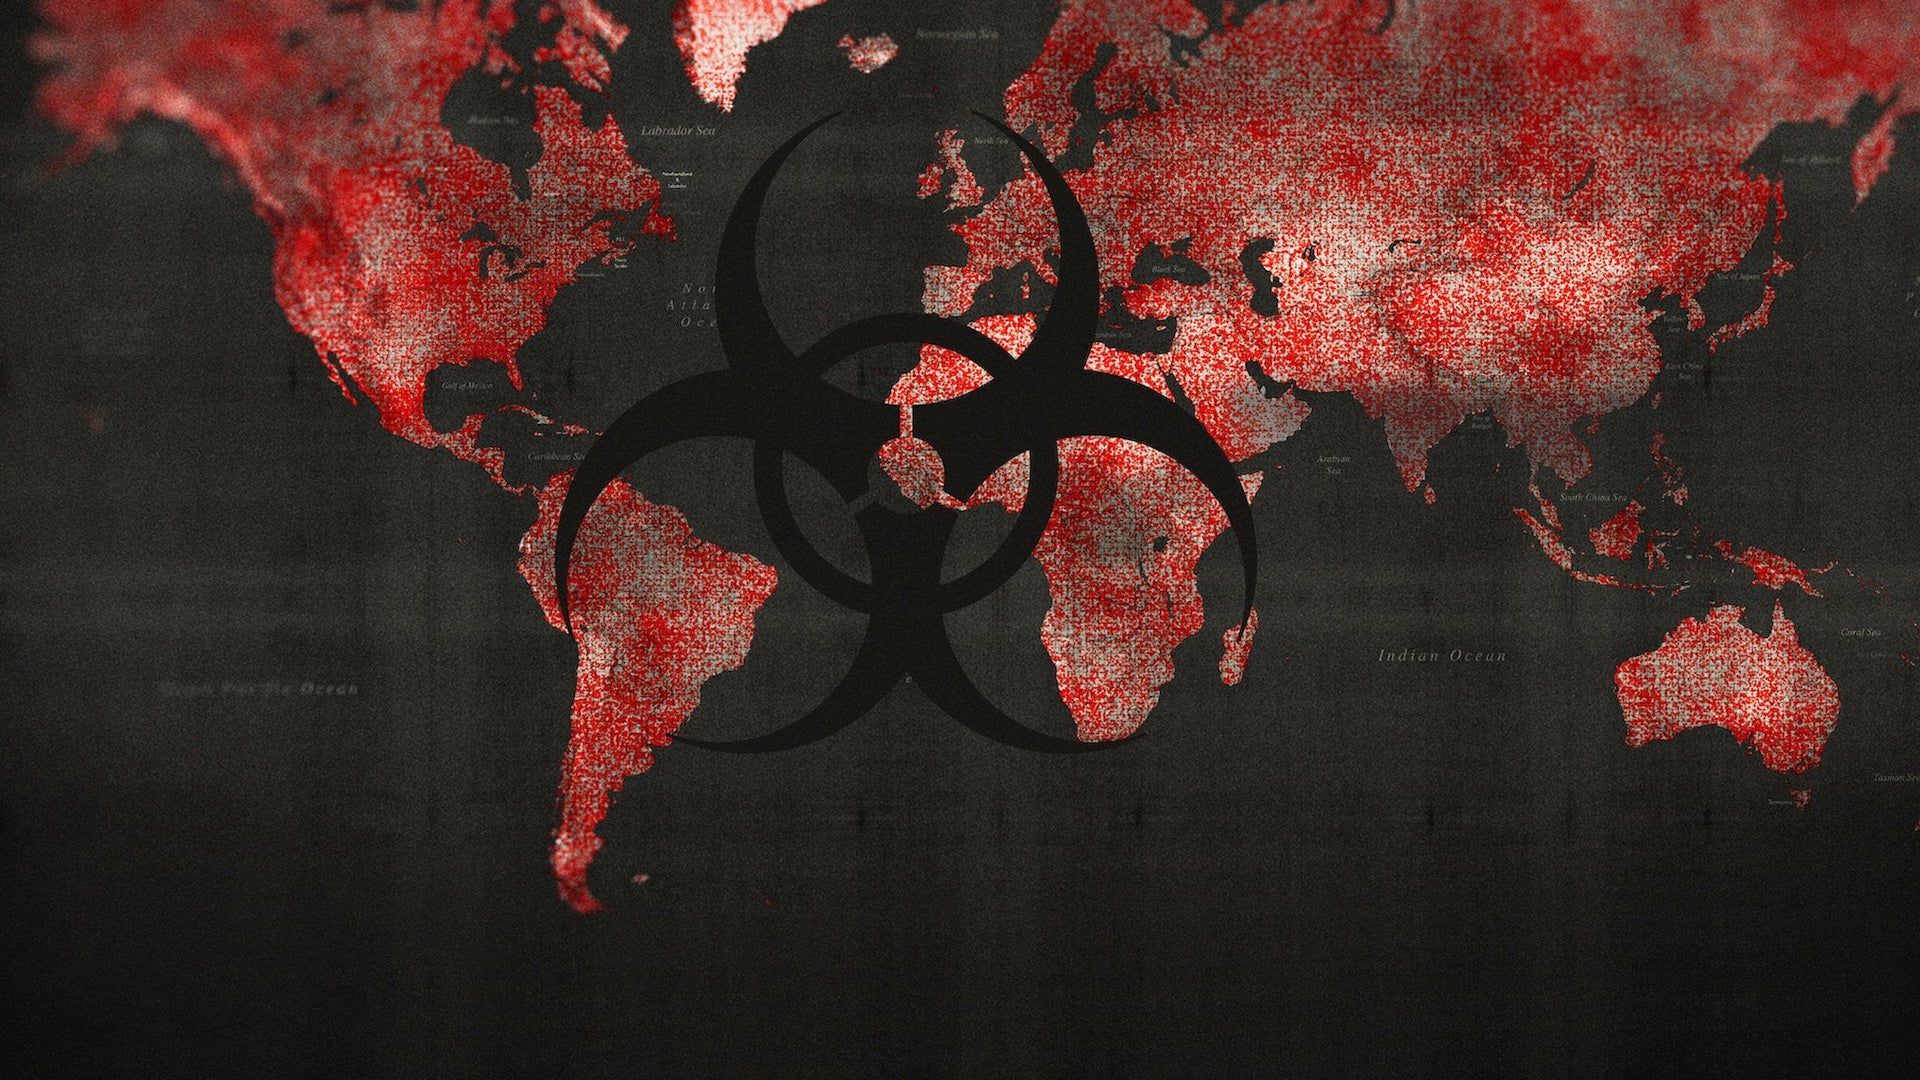 Pandemic: How to Prevent an Outbreak background